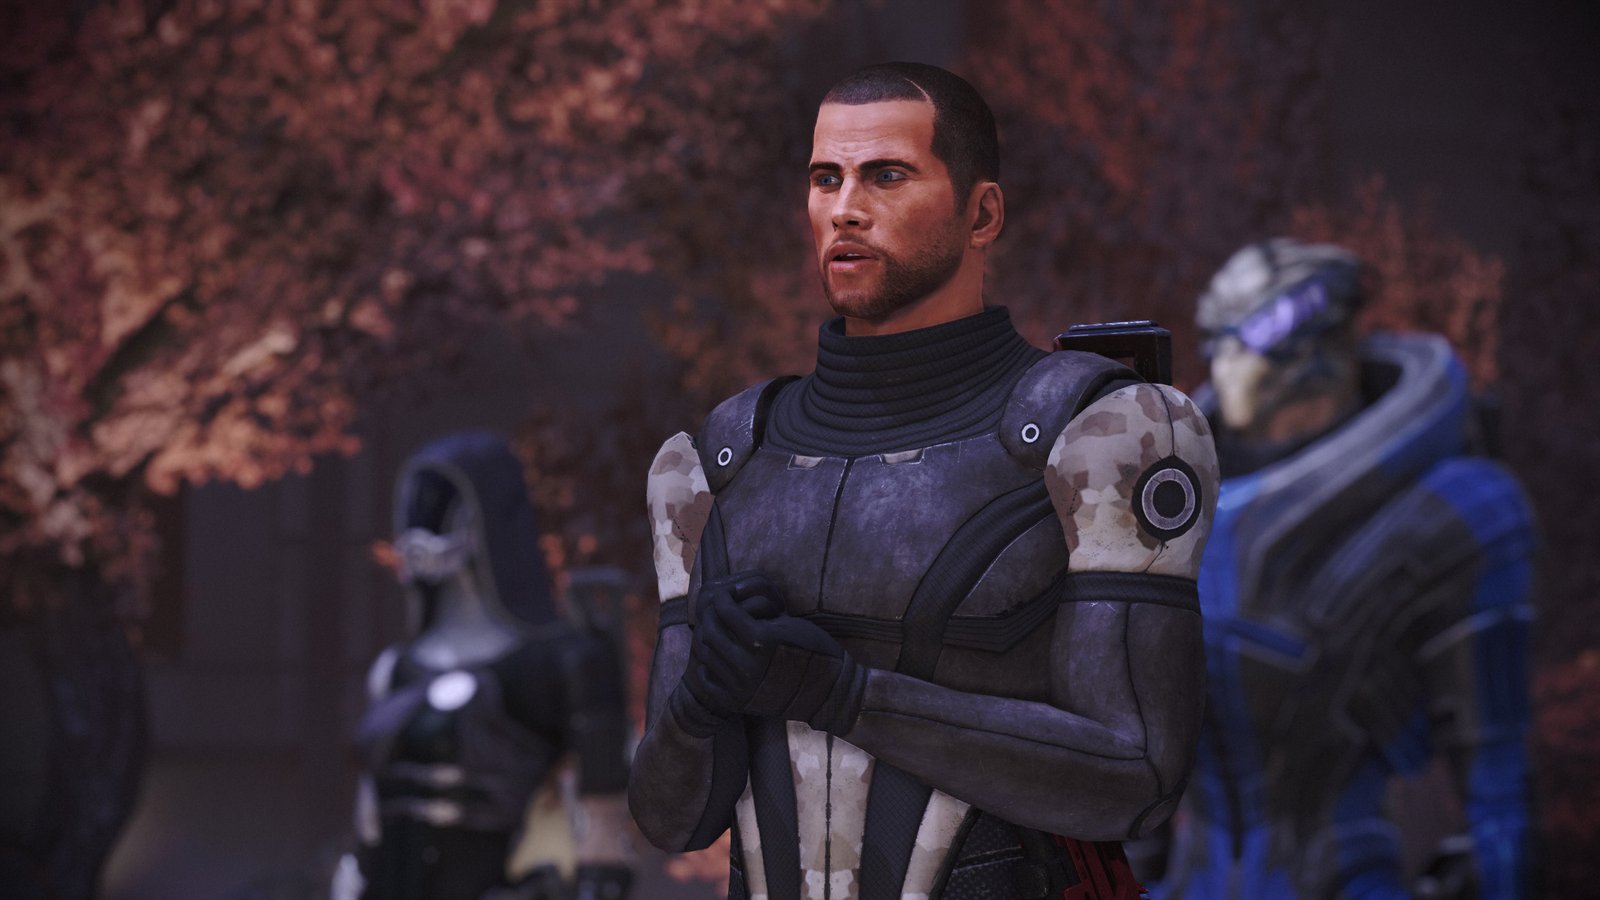 Man with short hair and in military armour in the foreground. A woman in a suit covering her entire body and face, and an alien looking male humanoid, stand in the background.